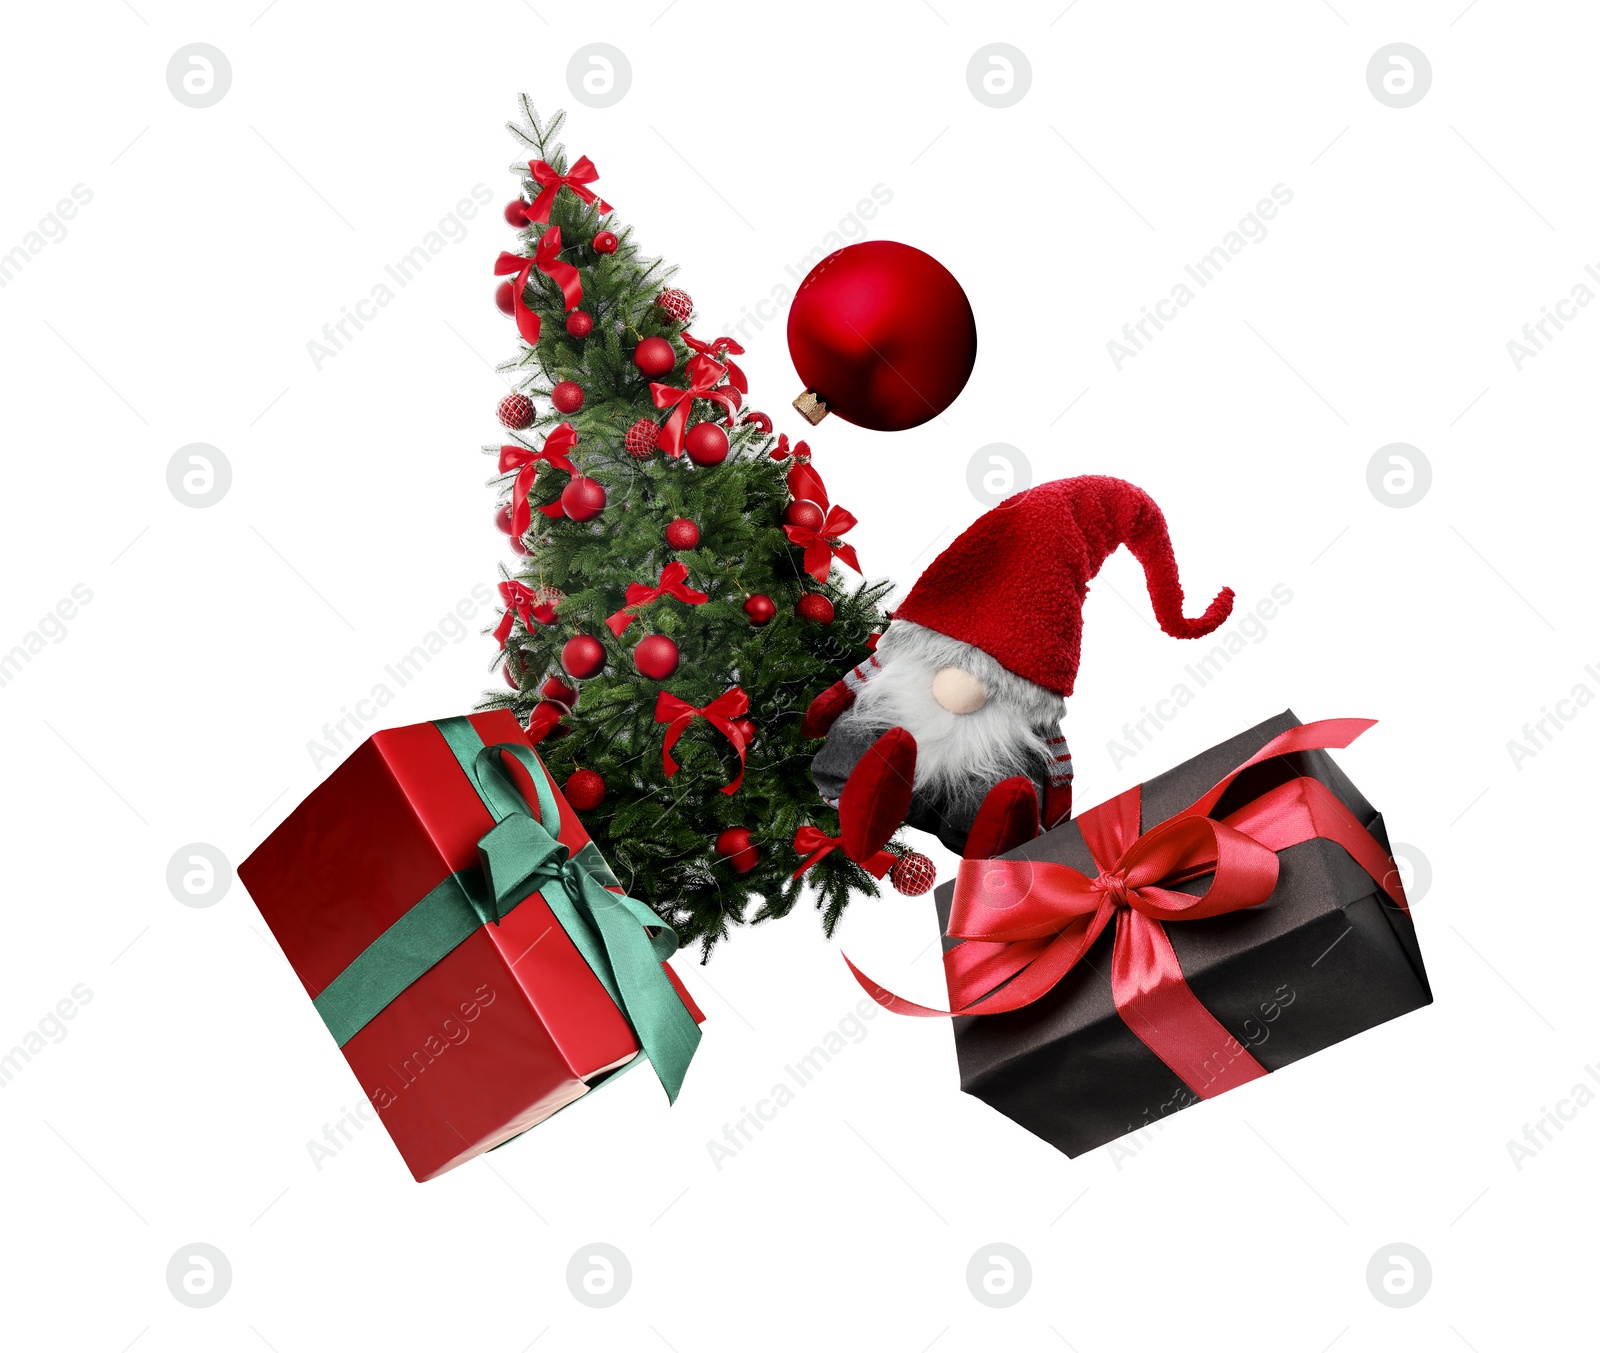 Image of Christmas celebration. Different festive stuff in air on white background